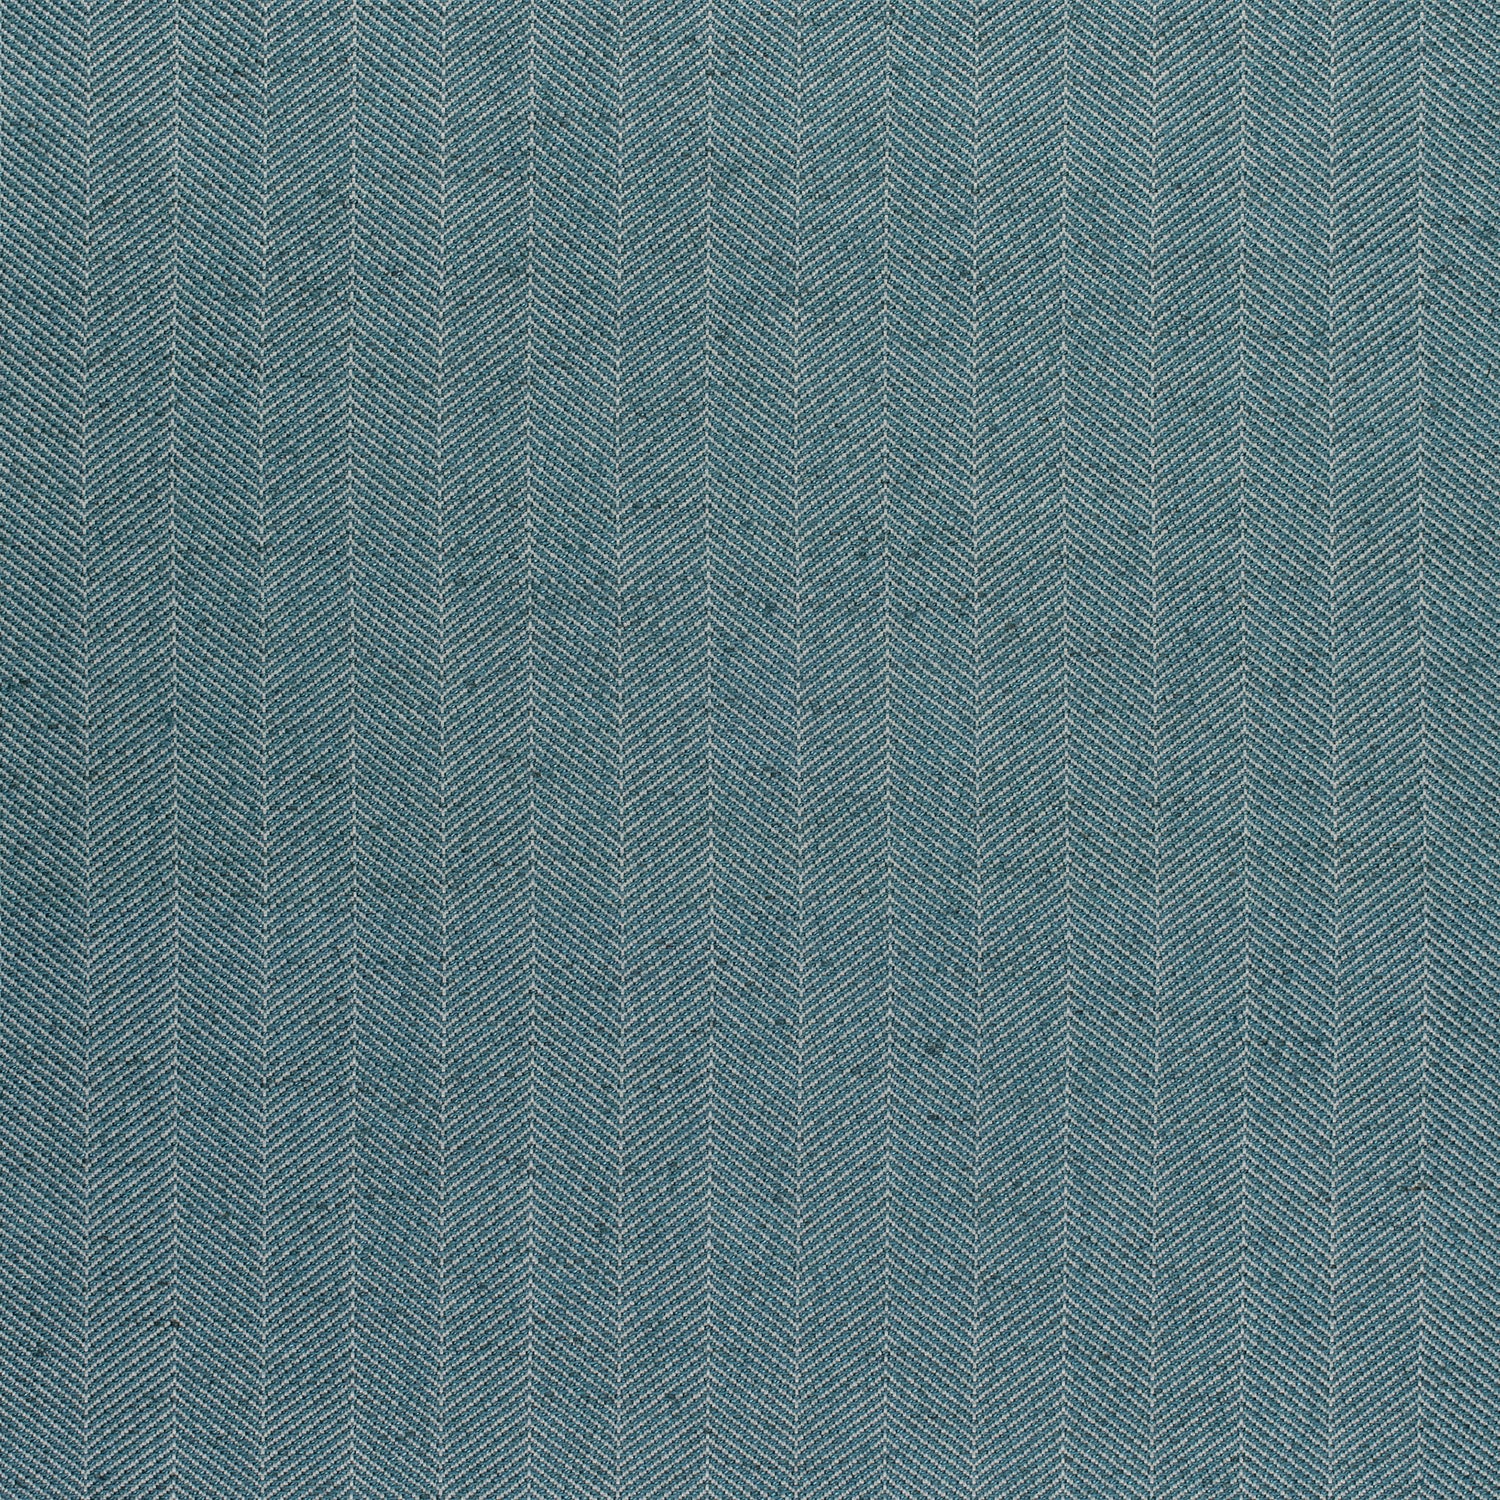 Hamilton Herringbone fabric in peacock color - pattern number W80672 - by Thibaut in the Pinnacle collection